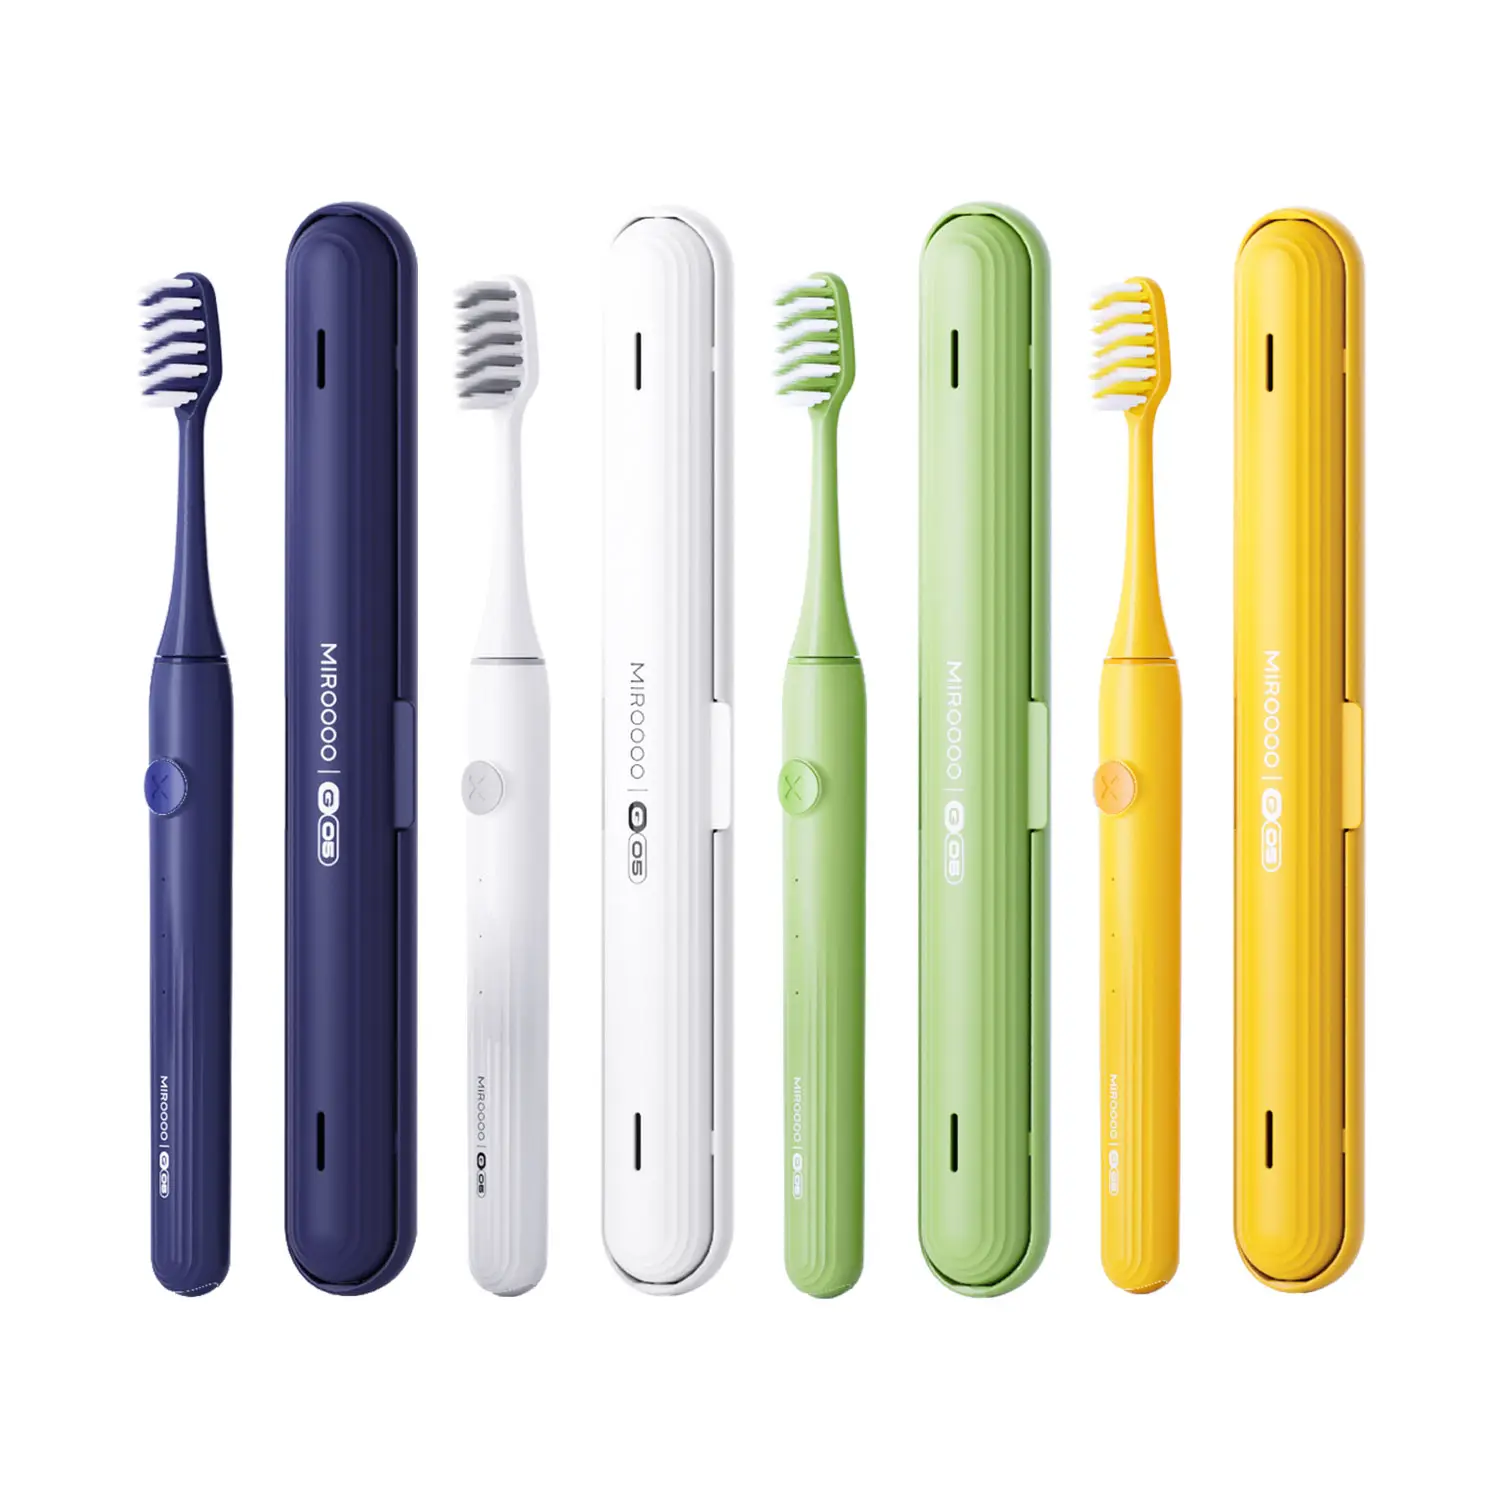 Soft bristle High-frequency Automatic USB rechargeable Travel Oral care Ultrasonic Sonic Electric toothbrush